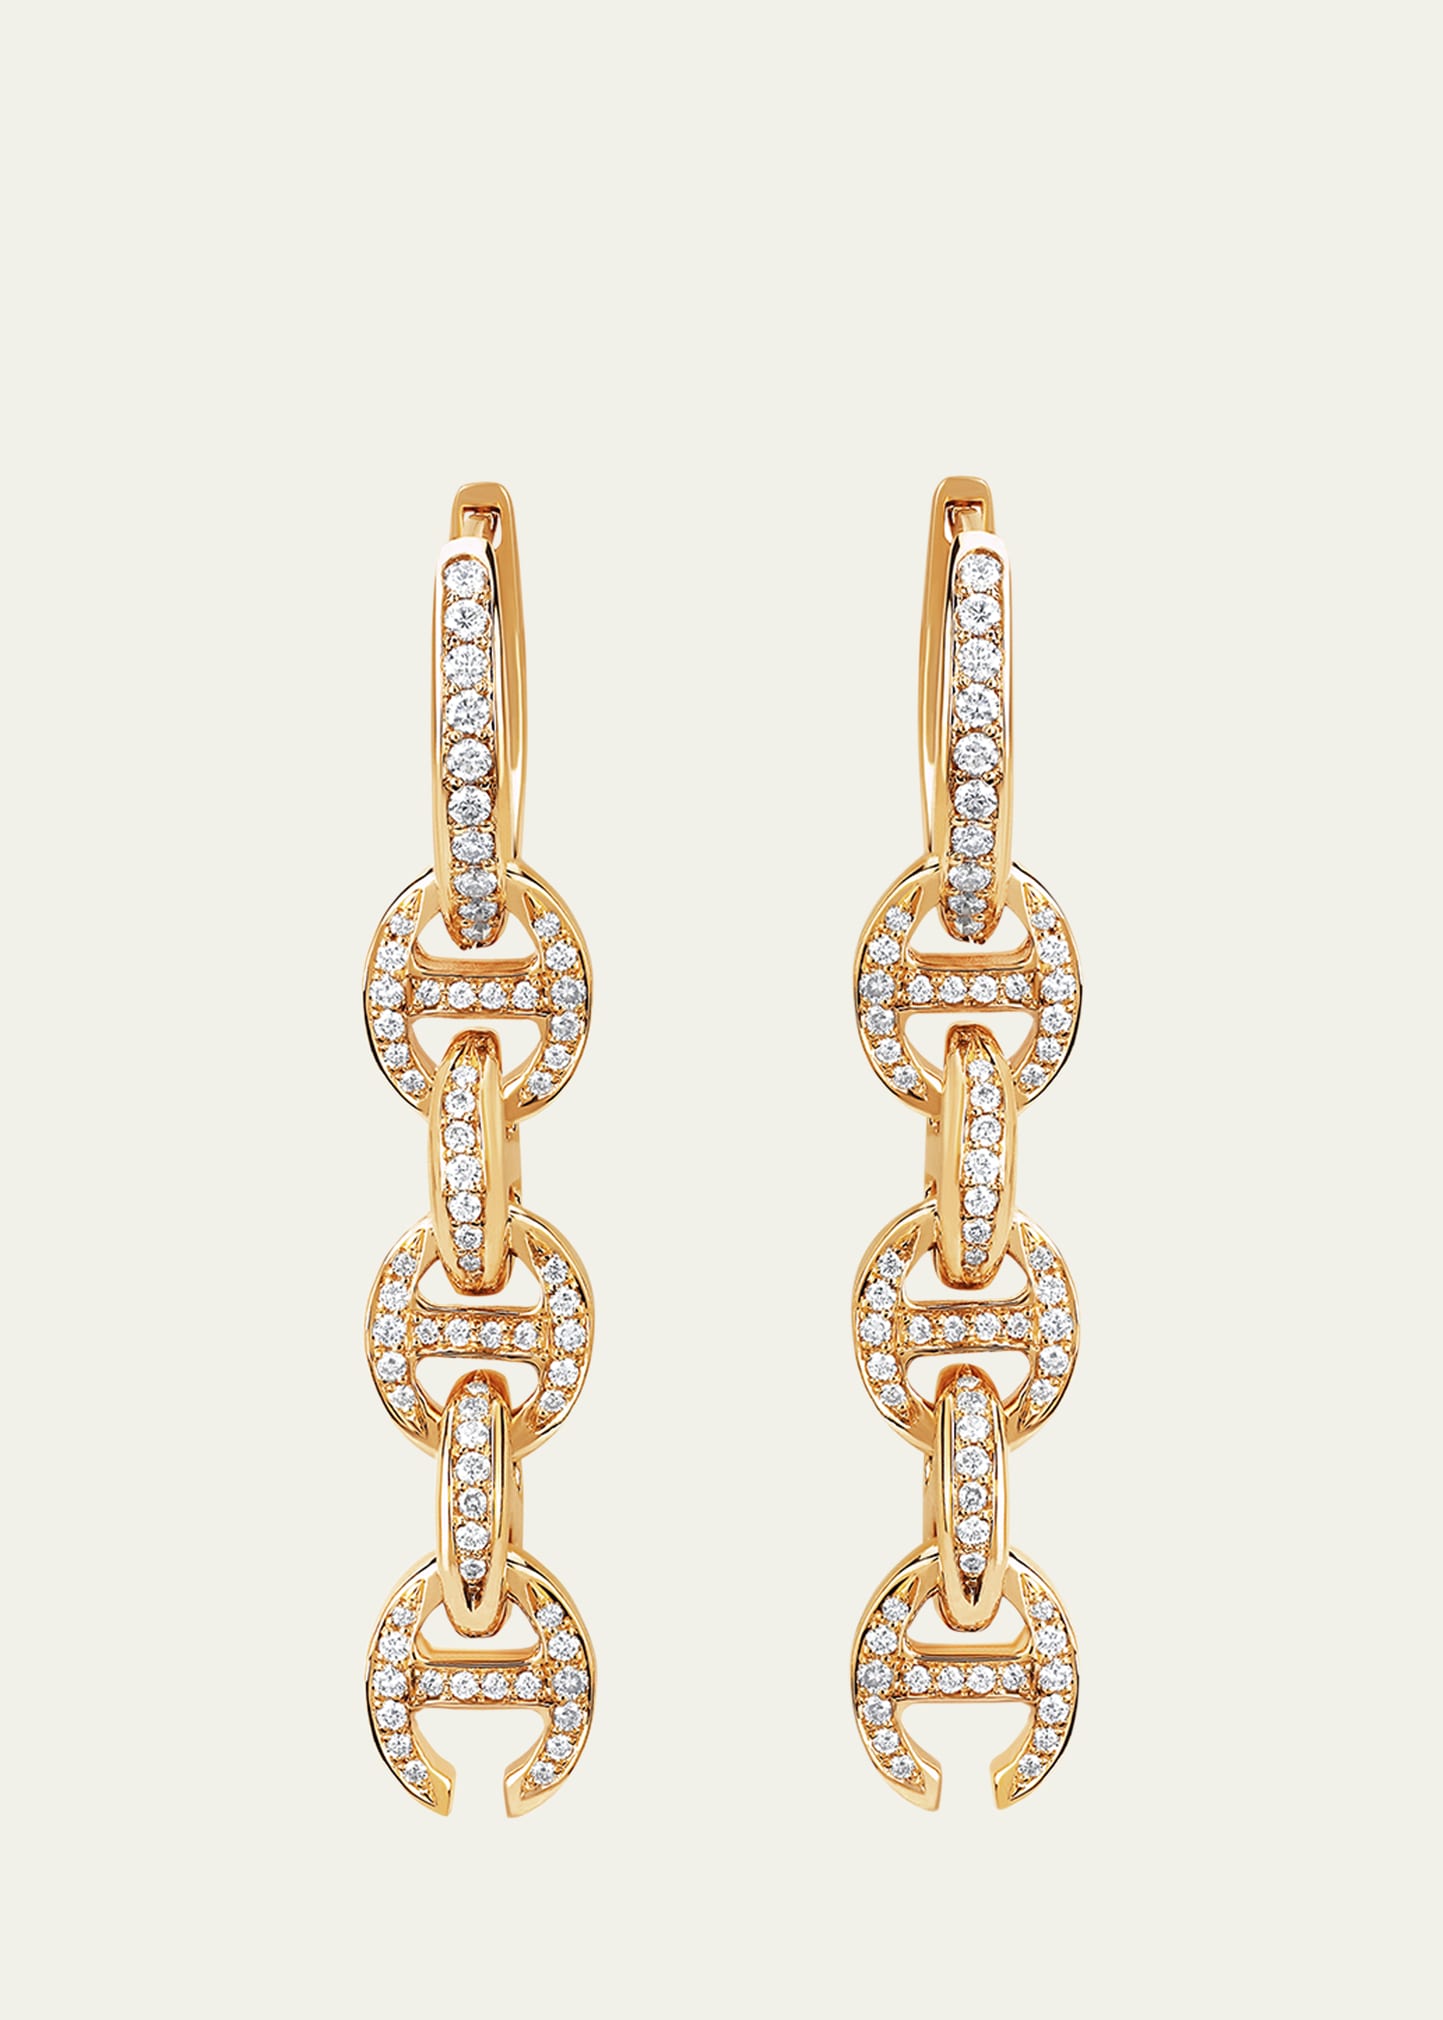 18K Yellow Gold 5 Link Pave Drip Earrings with White Diamonds